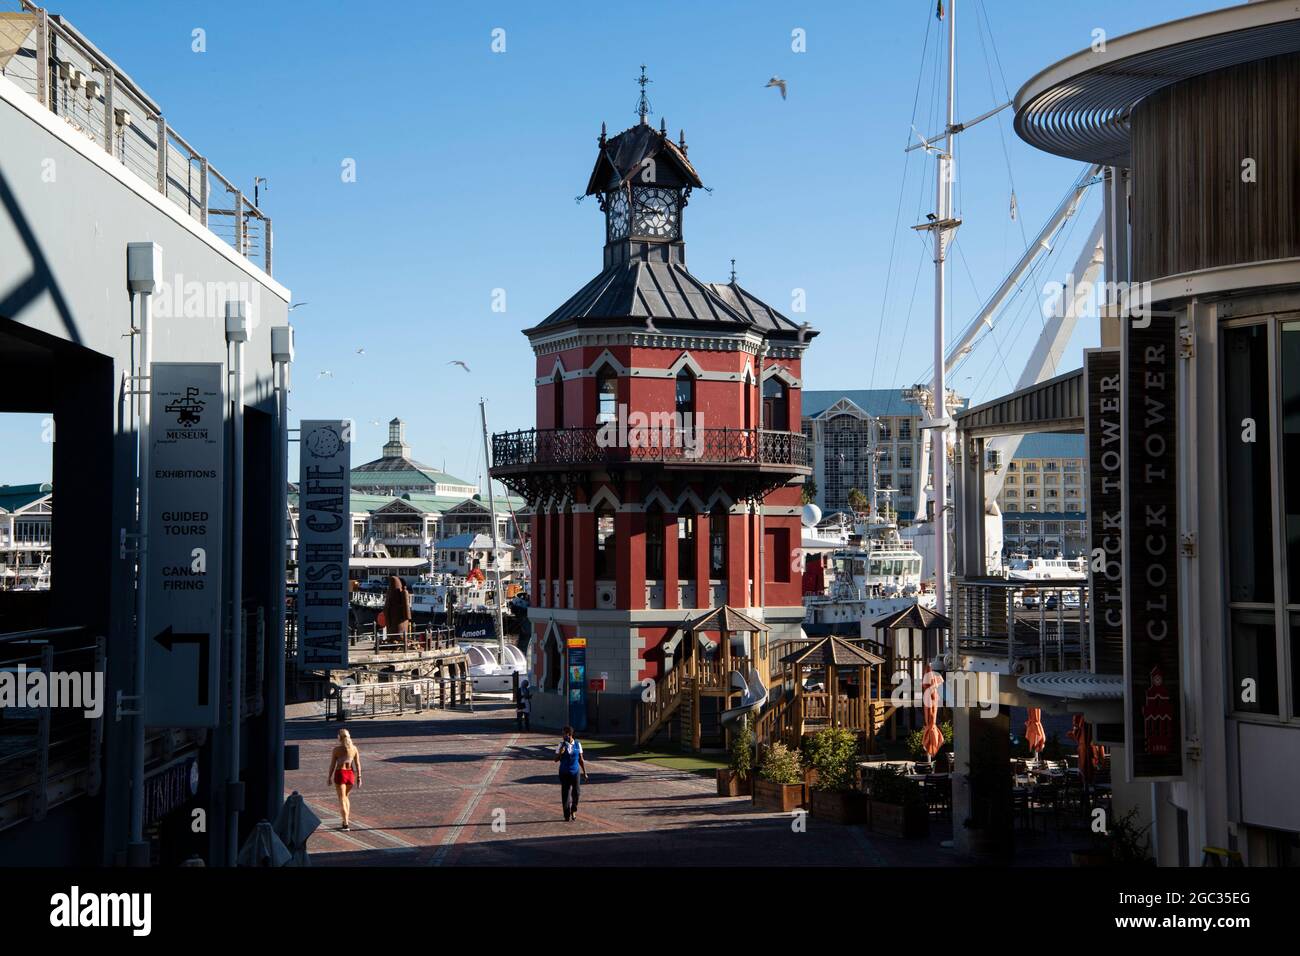 The Clock Tower, Victoria & Alfred Waterfront, Cape Town, South Africa Stock Photo